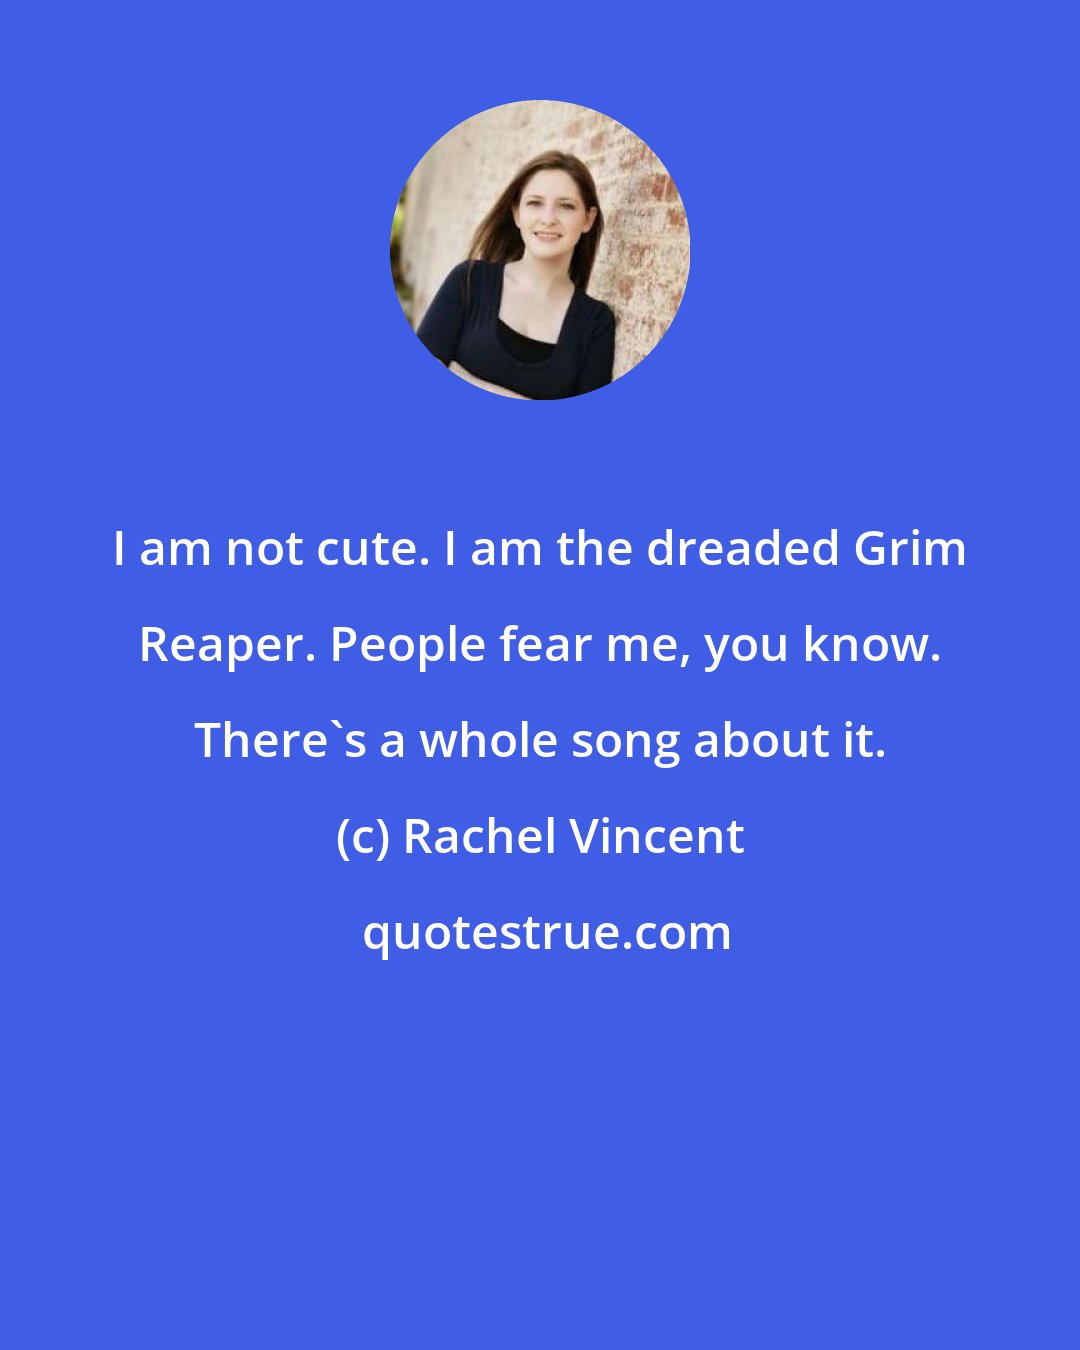 Rachel Vincent: I am not cute. I am the dreaded Grim Reaper. People fear me, you know. There's a whole song about it.